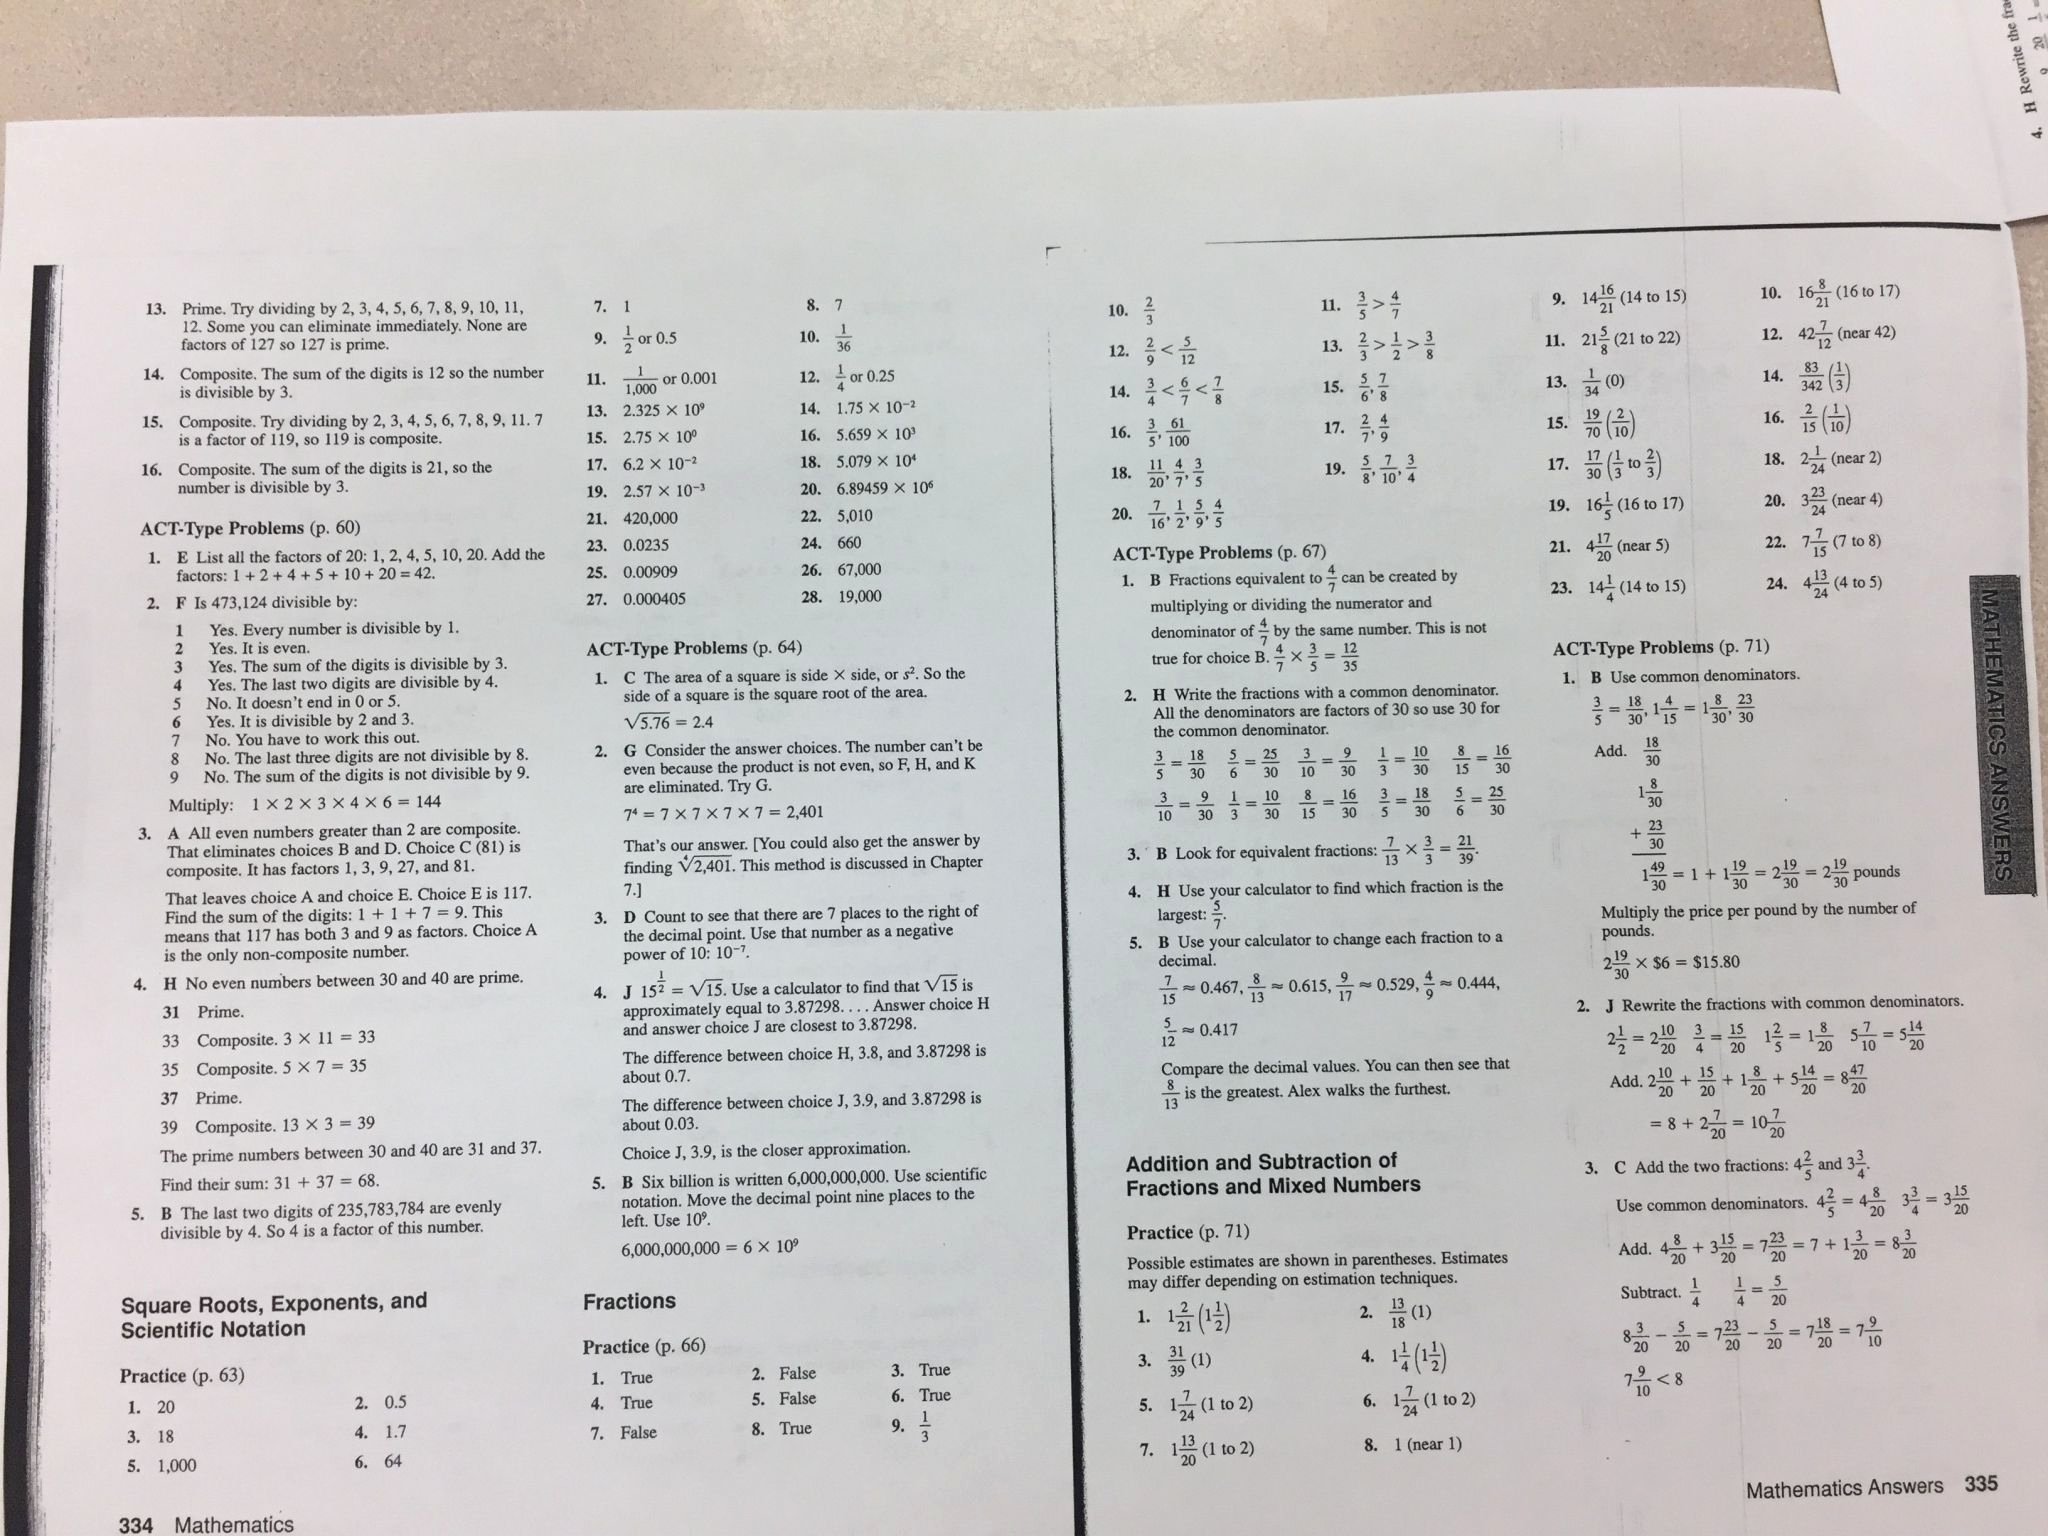 Anatomy Of the Constitution Worksheet Unique Constitutional Numbers Worksheet Answers